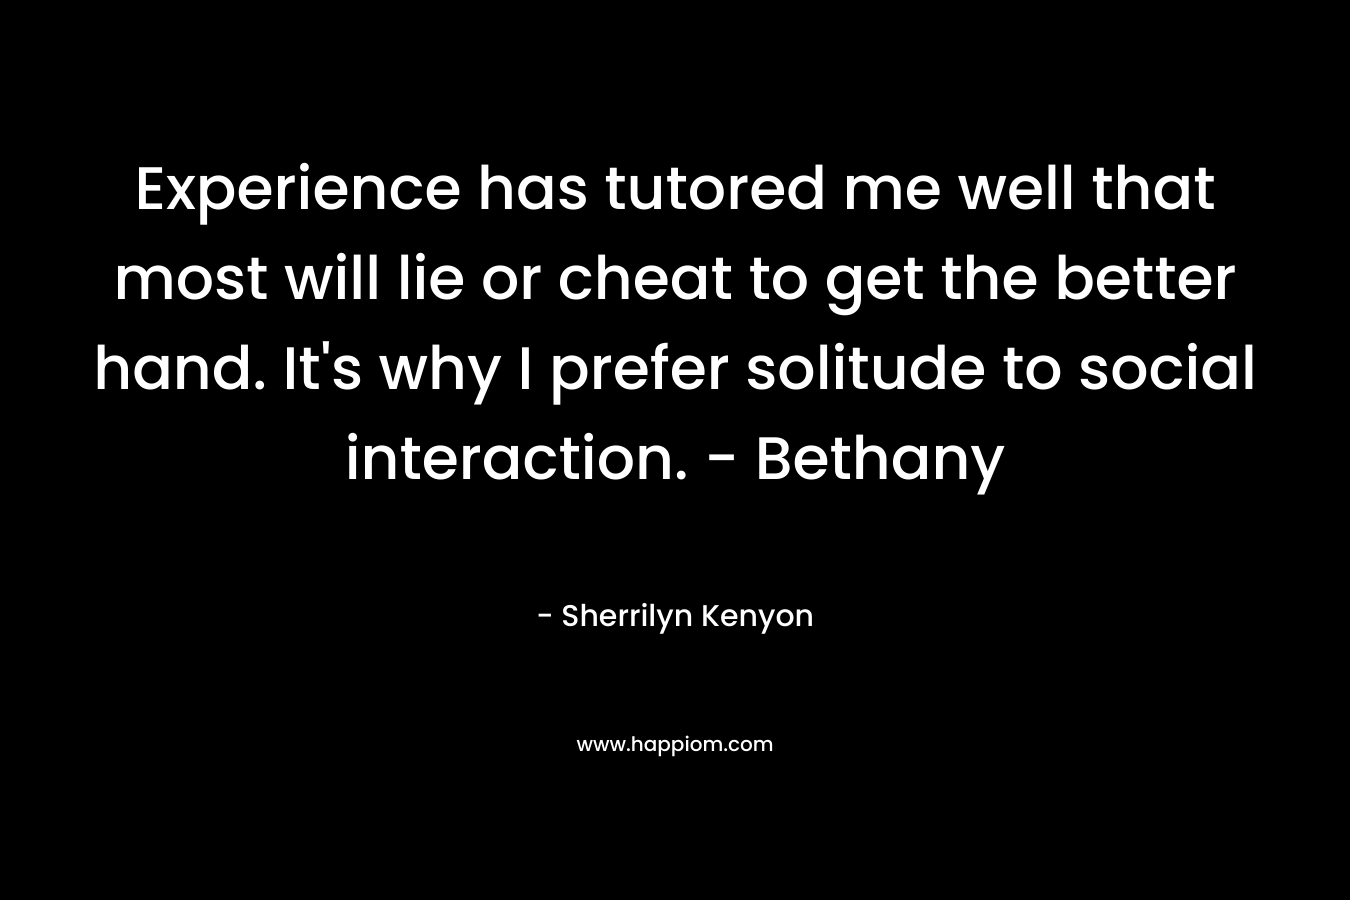 Experience has tutored me well that most will lie or cheat to get the better hand. It's why I prefer solitude to social interaction. - Bethany